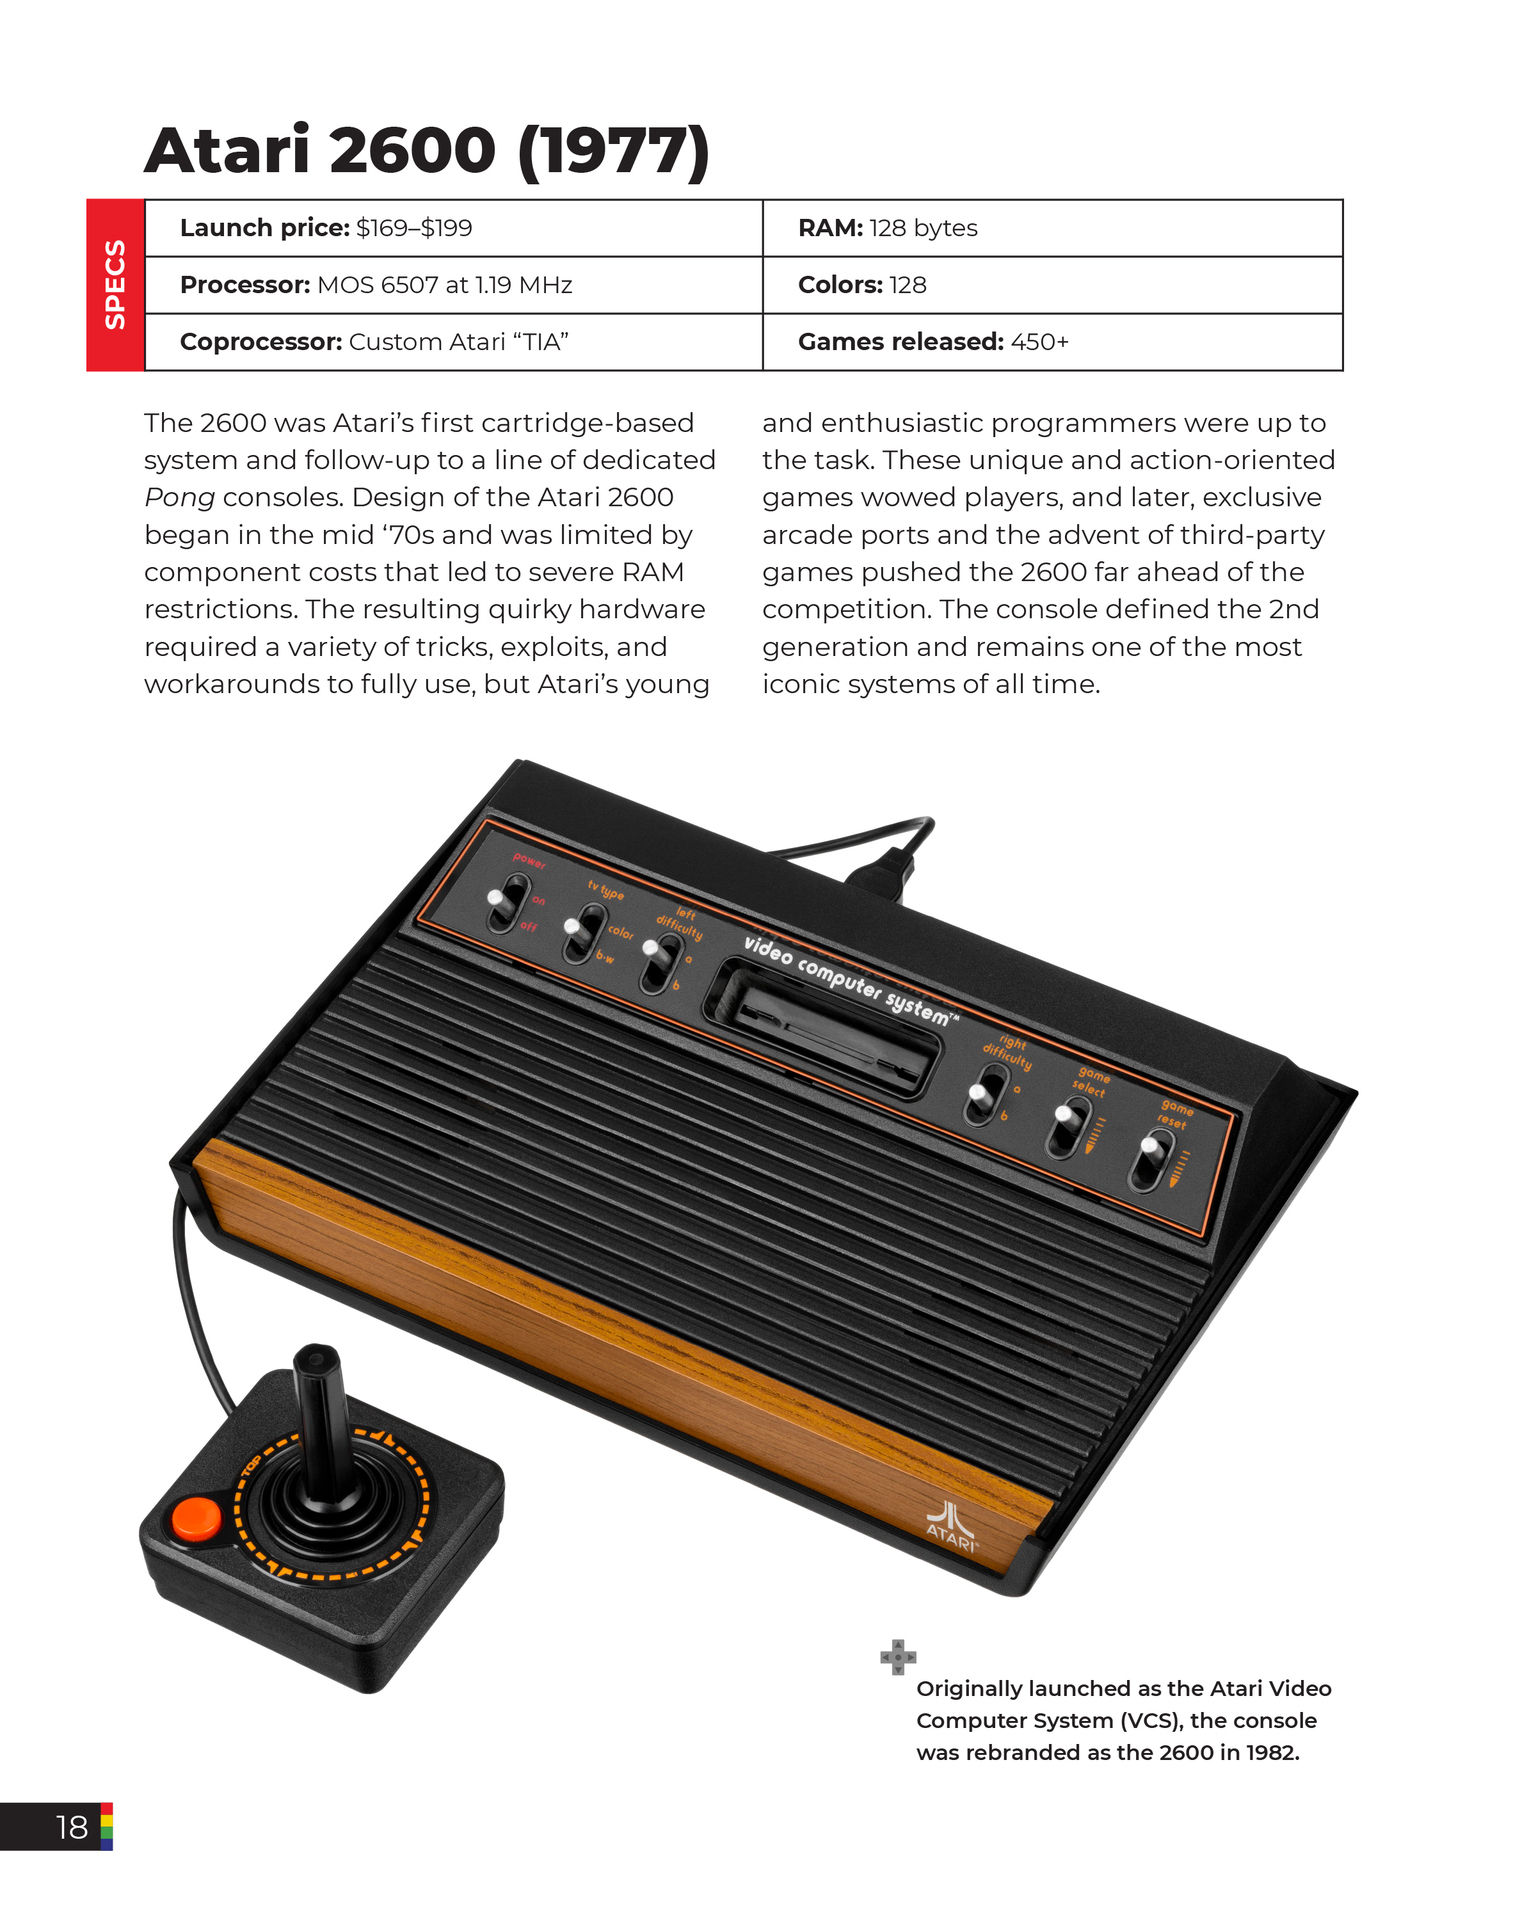 The game console a photographic history from Atari to Xbox - photo 31